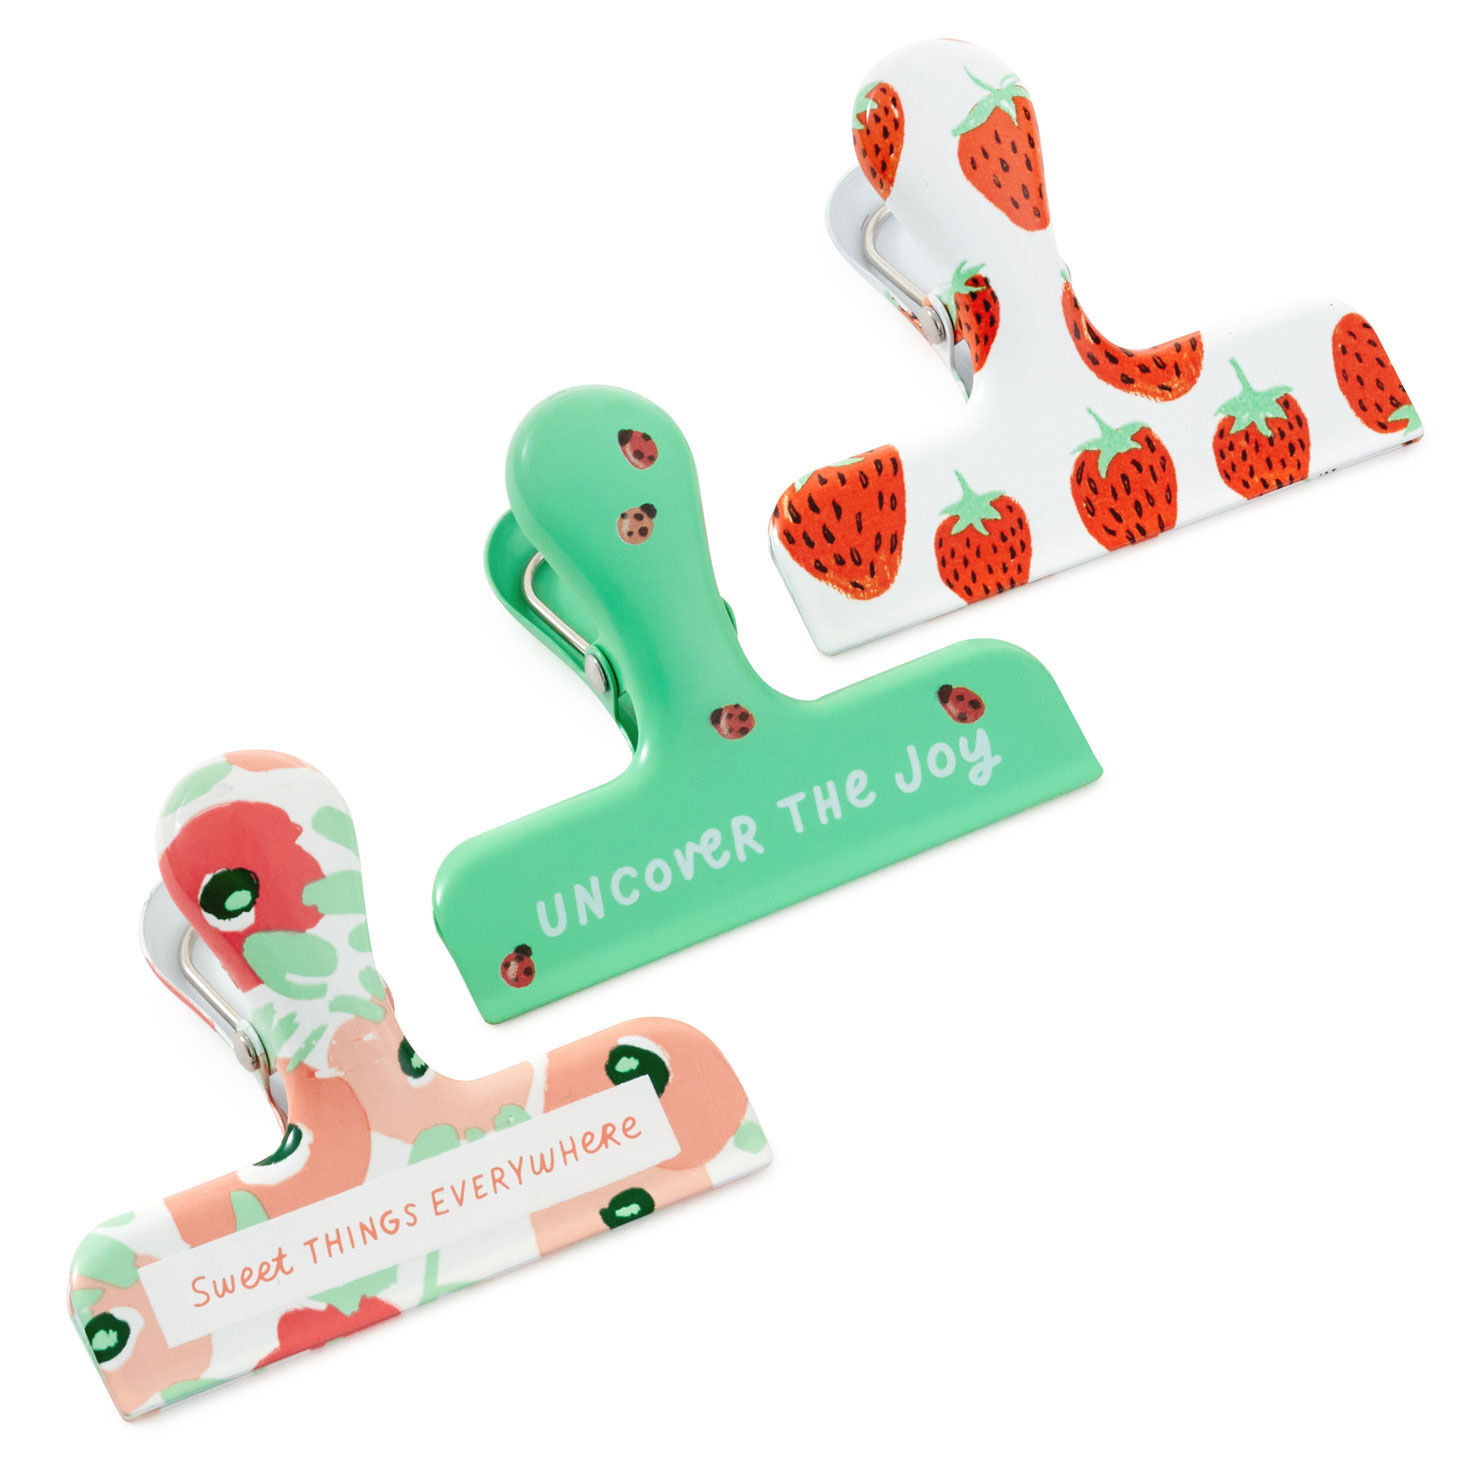 Sweet Things Everywhere Chip Clips, Set of 3 for only USD 12.99 | Hallmark